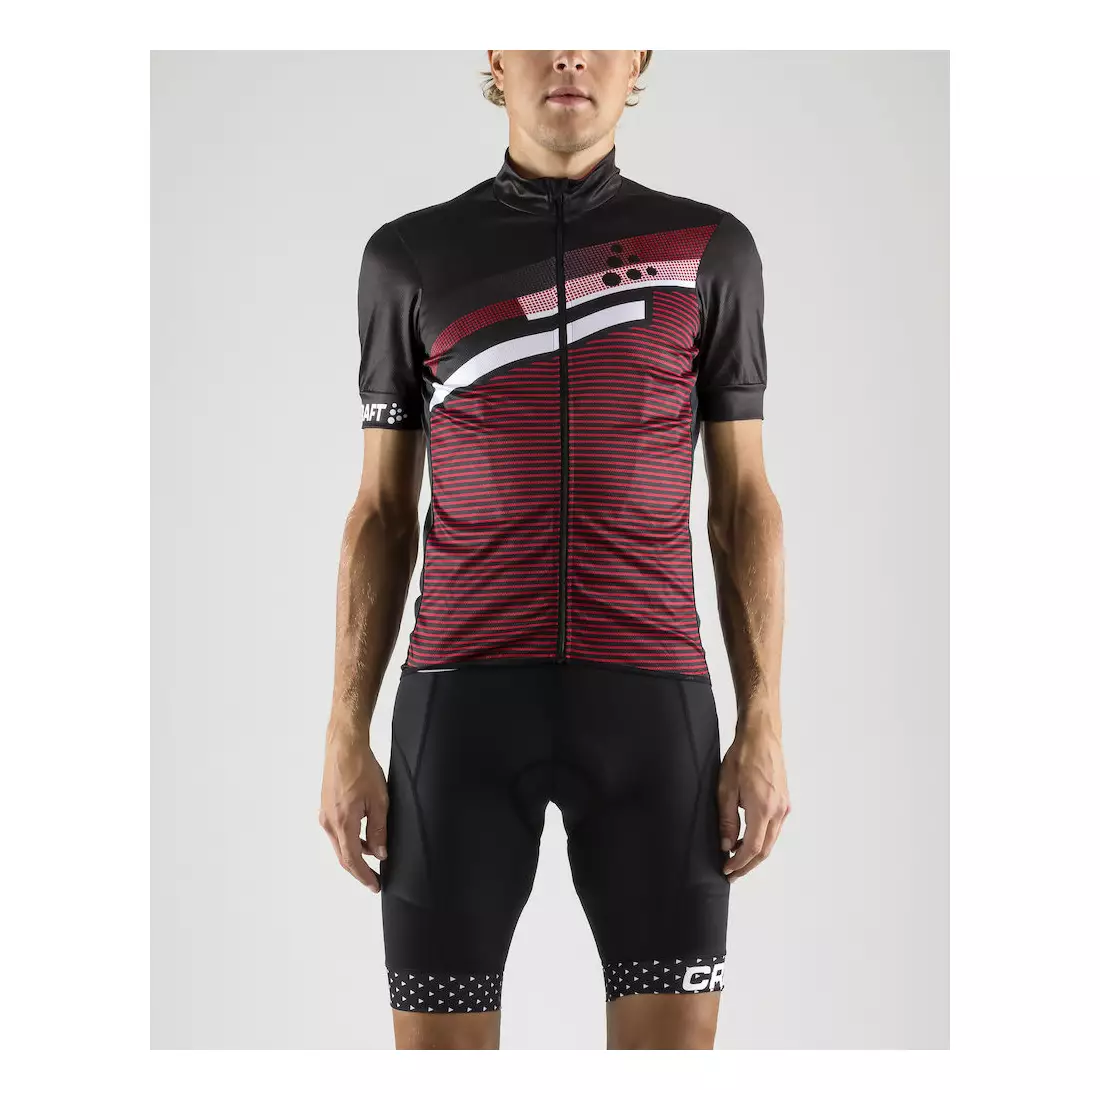 CRAFT Reel Graphic 1905004-9430 - men's cycling jersey